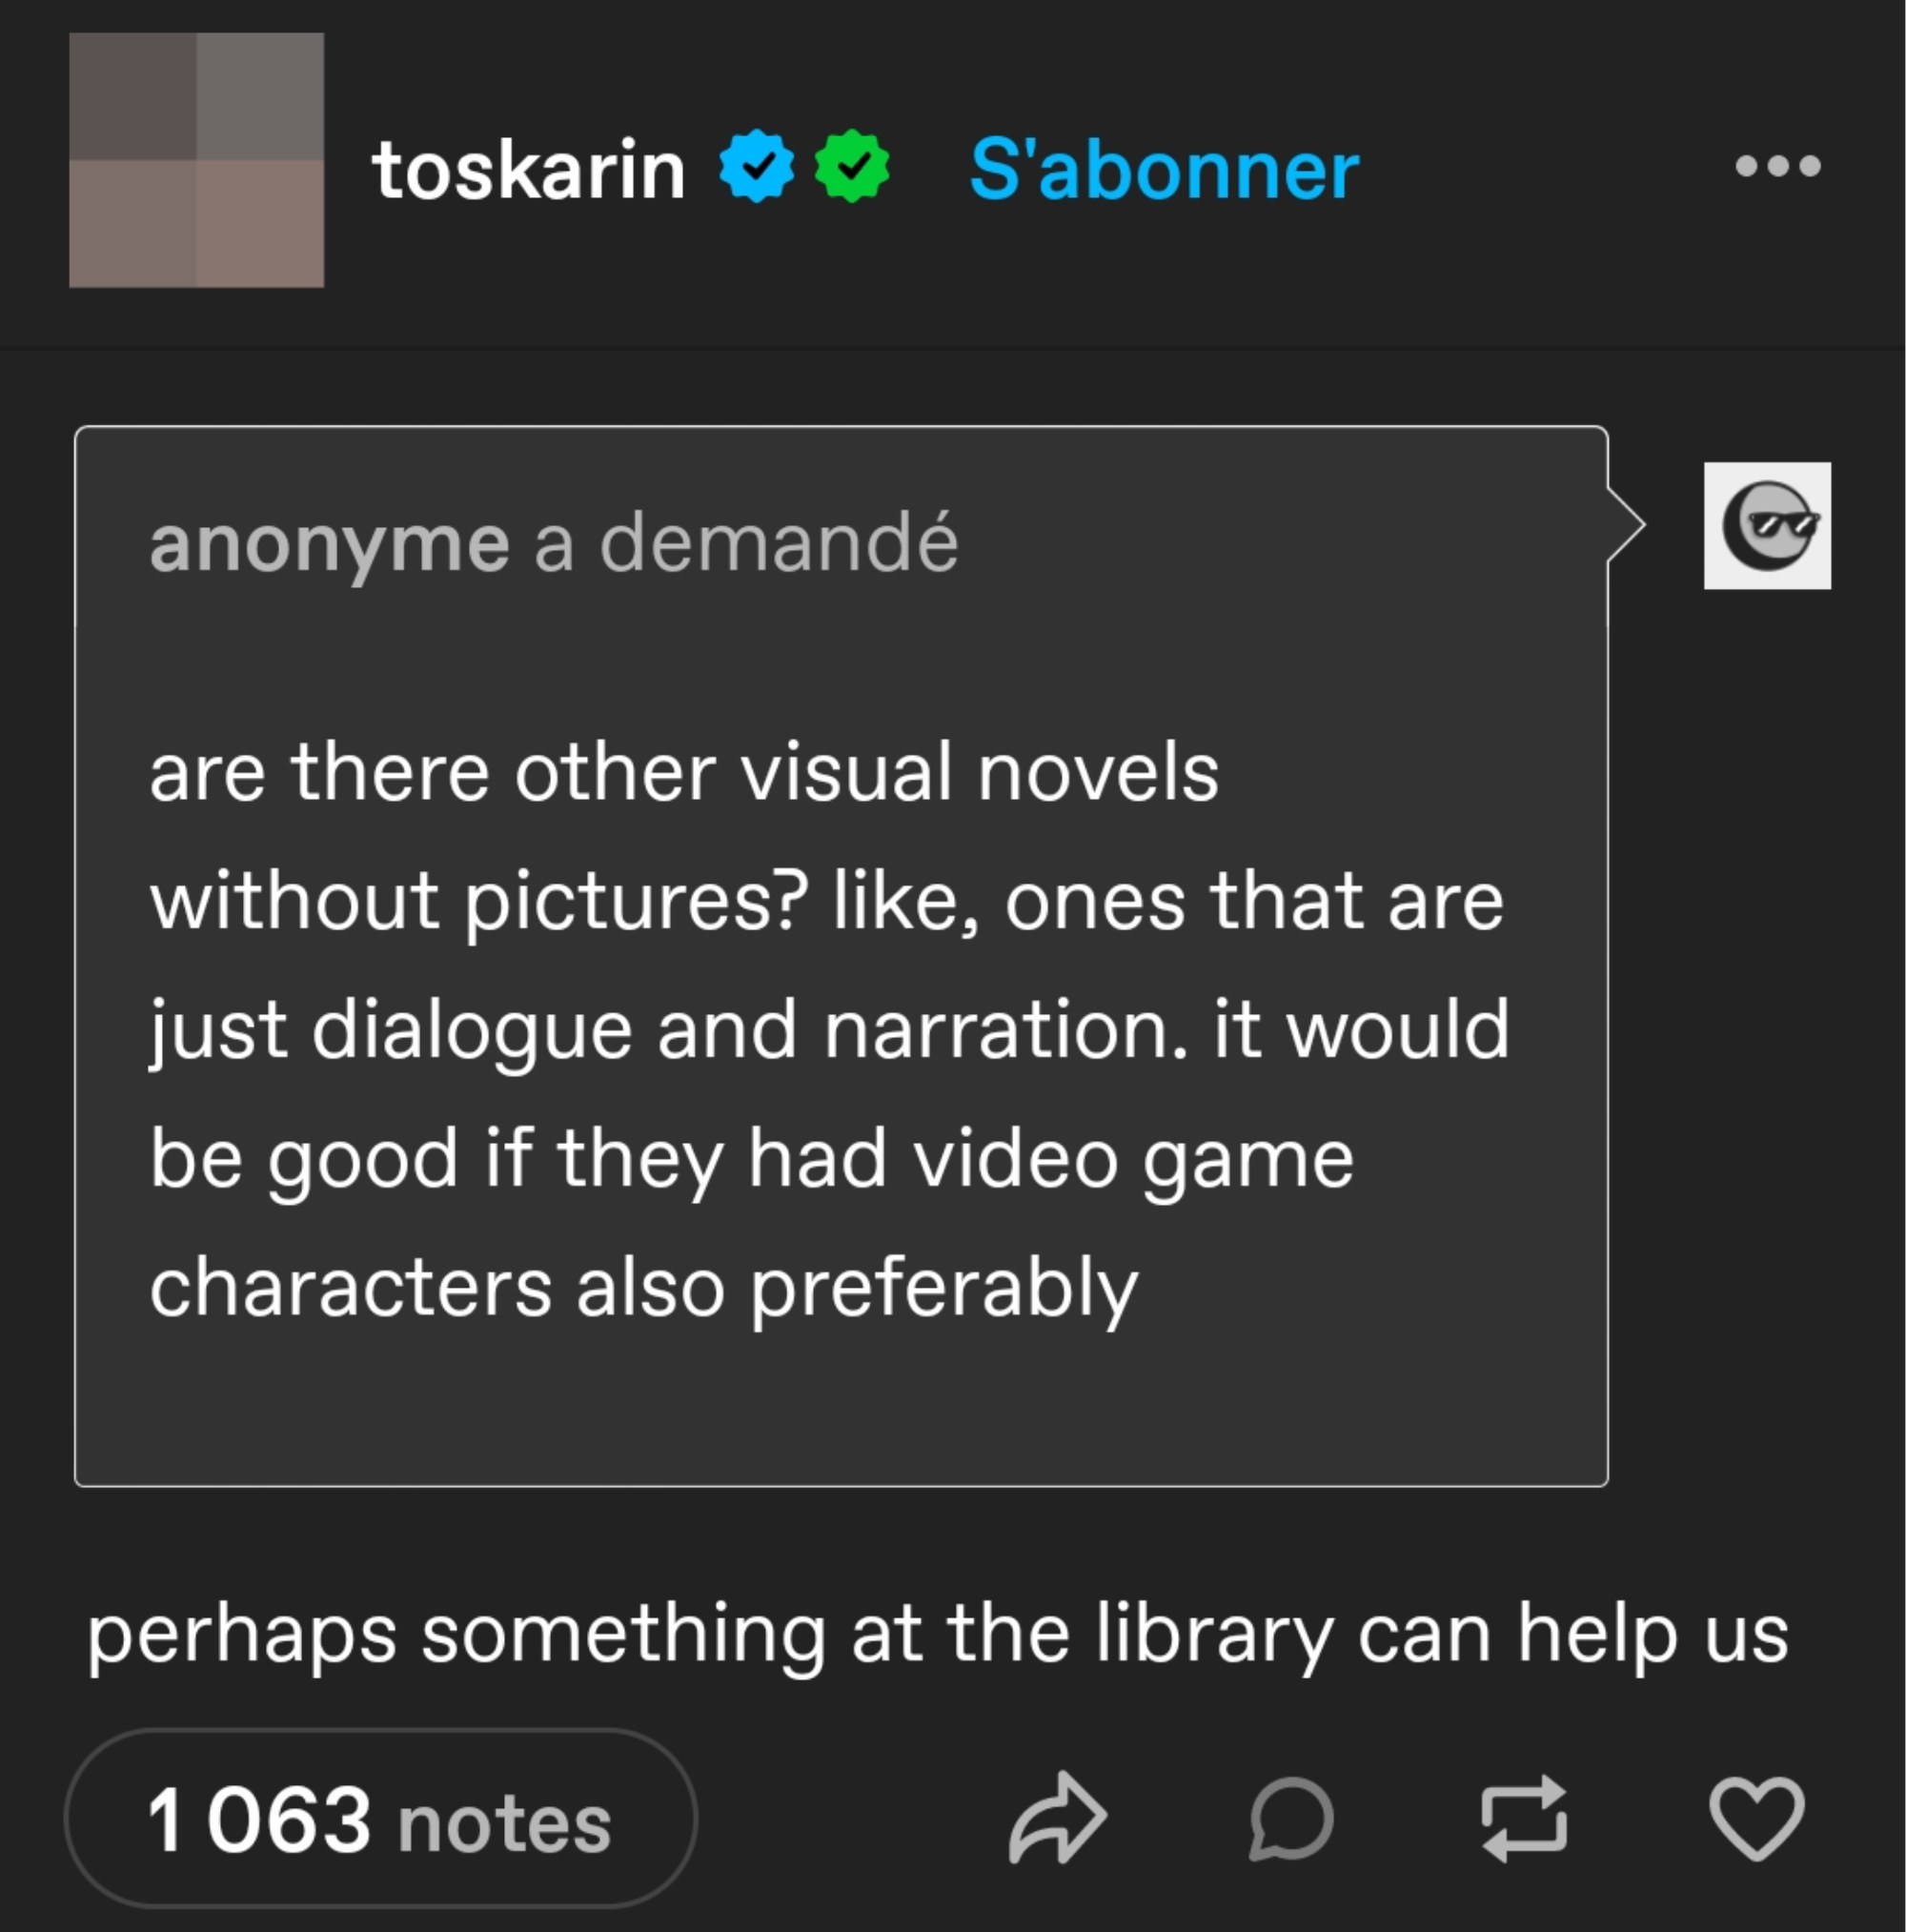 Person asks &quot;Are there other visual novels without pictures? Like ones that are just dialogue and narration,&quot; and someone responds, &quot;perhaps something at the library can help us&quot;